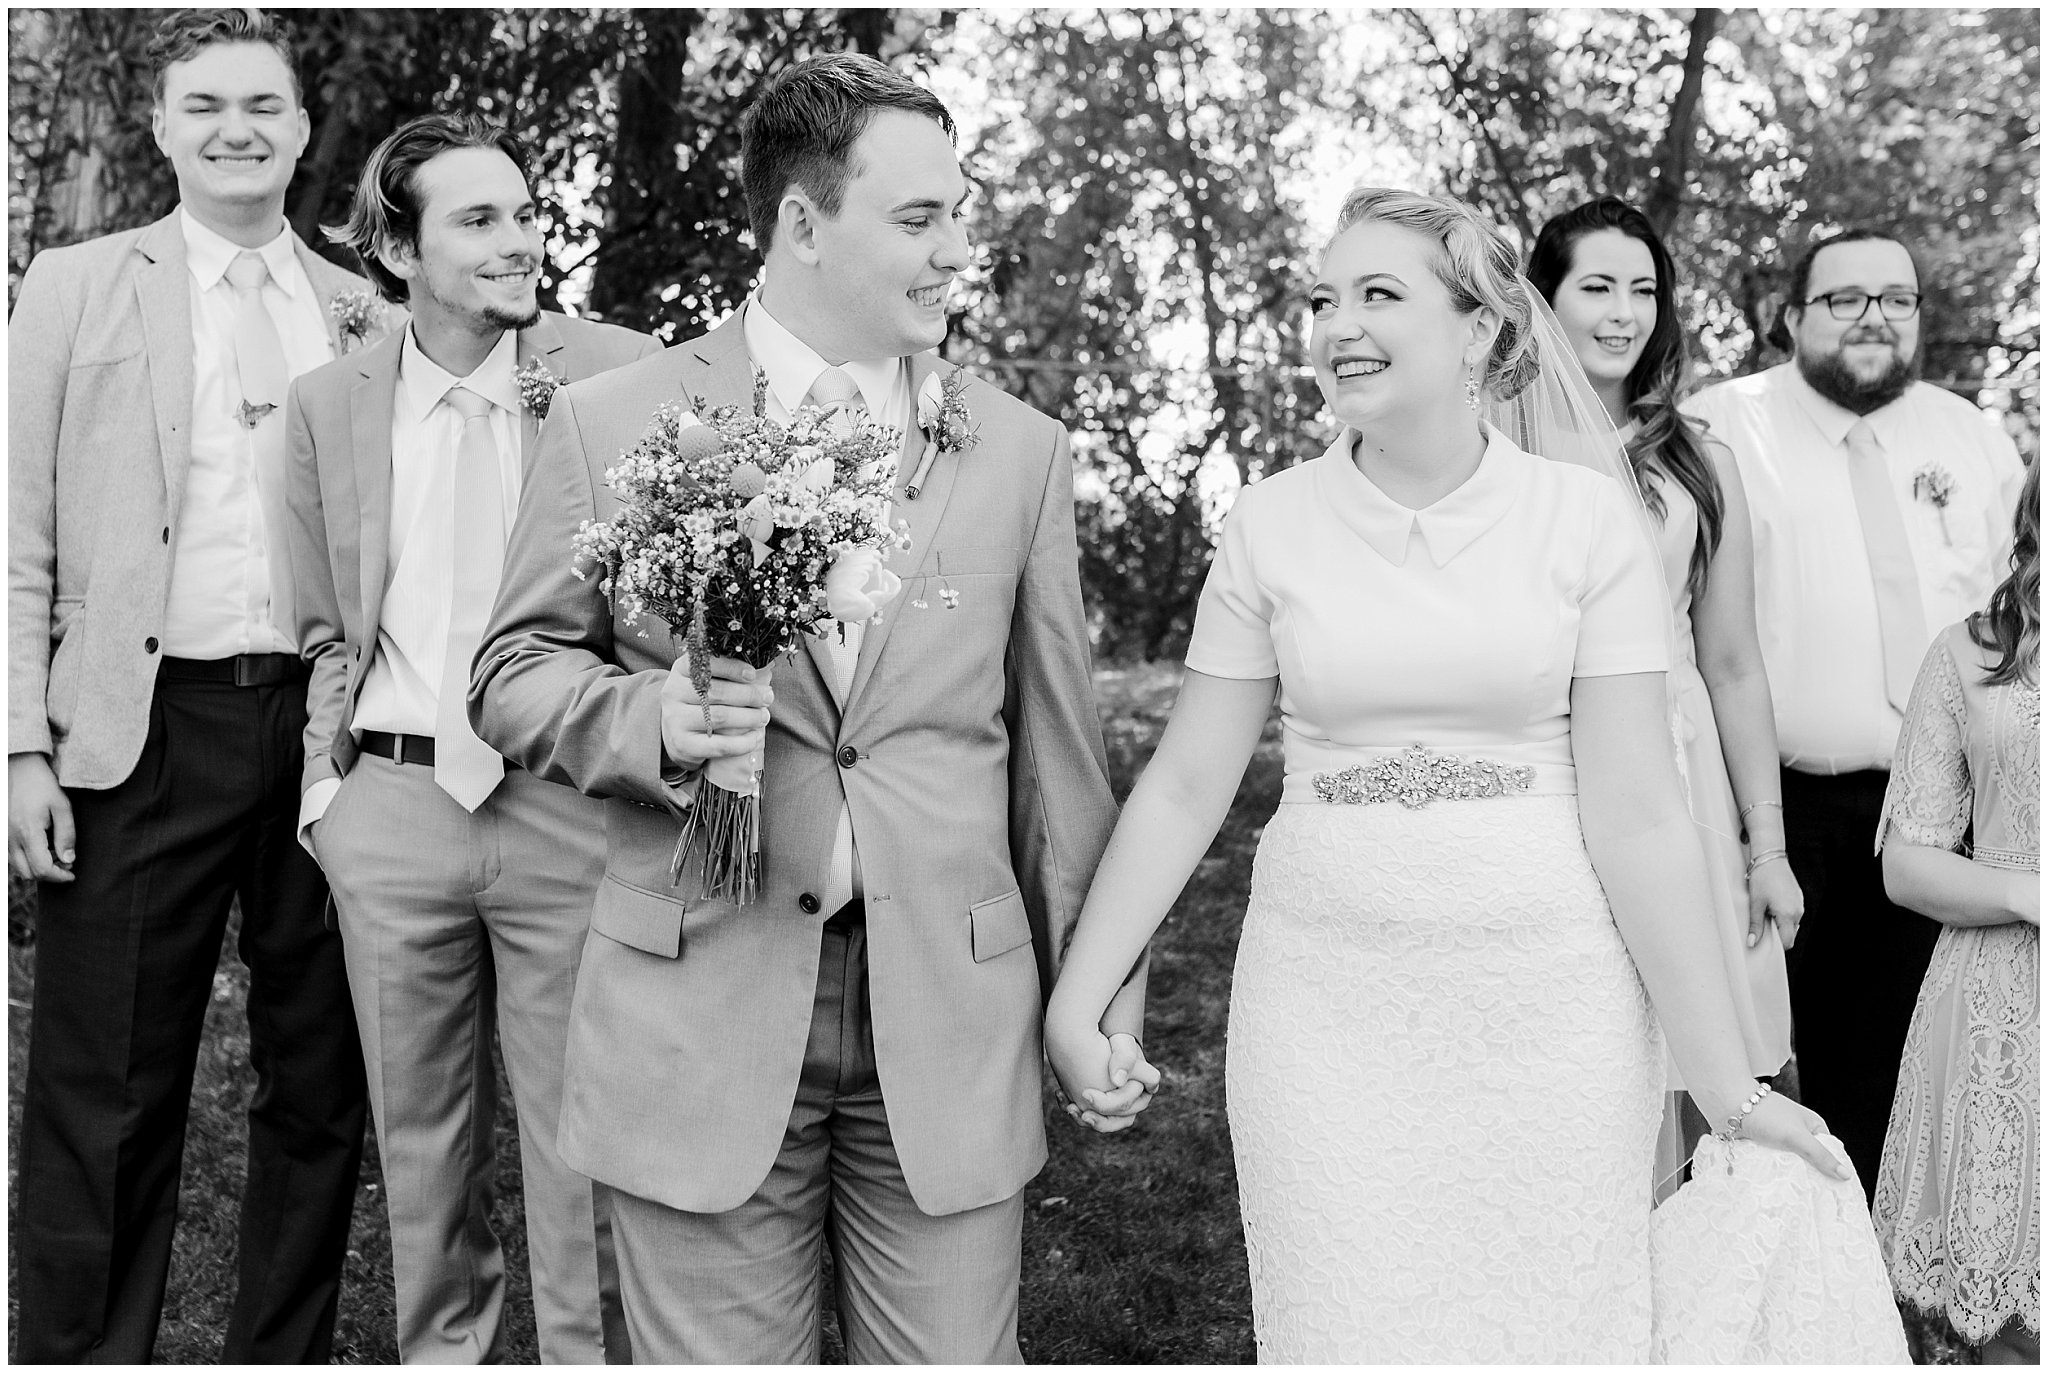 Wedding party in lavender dresses and yellow ties with wildflowers | Fountain View Event Venue and Bountiful Temple Wedding | Jessie and Dallin Photography